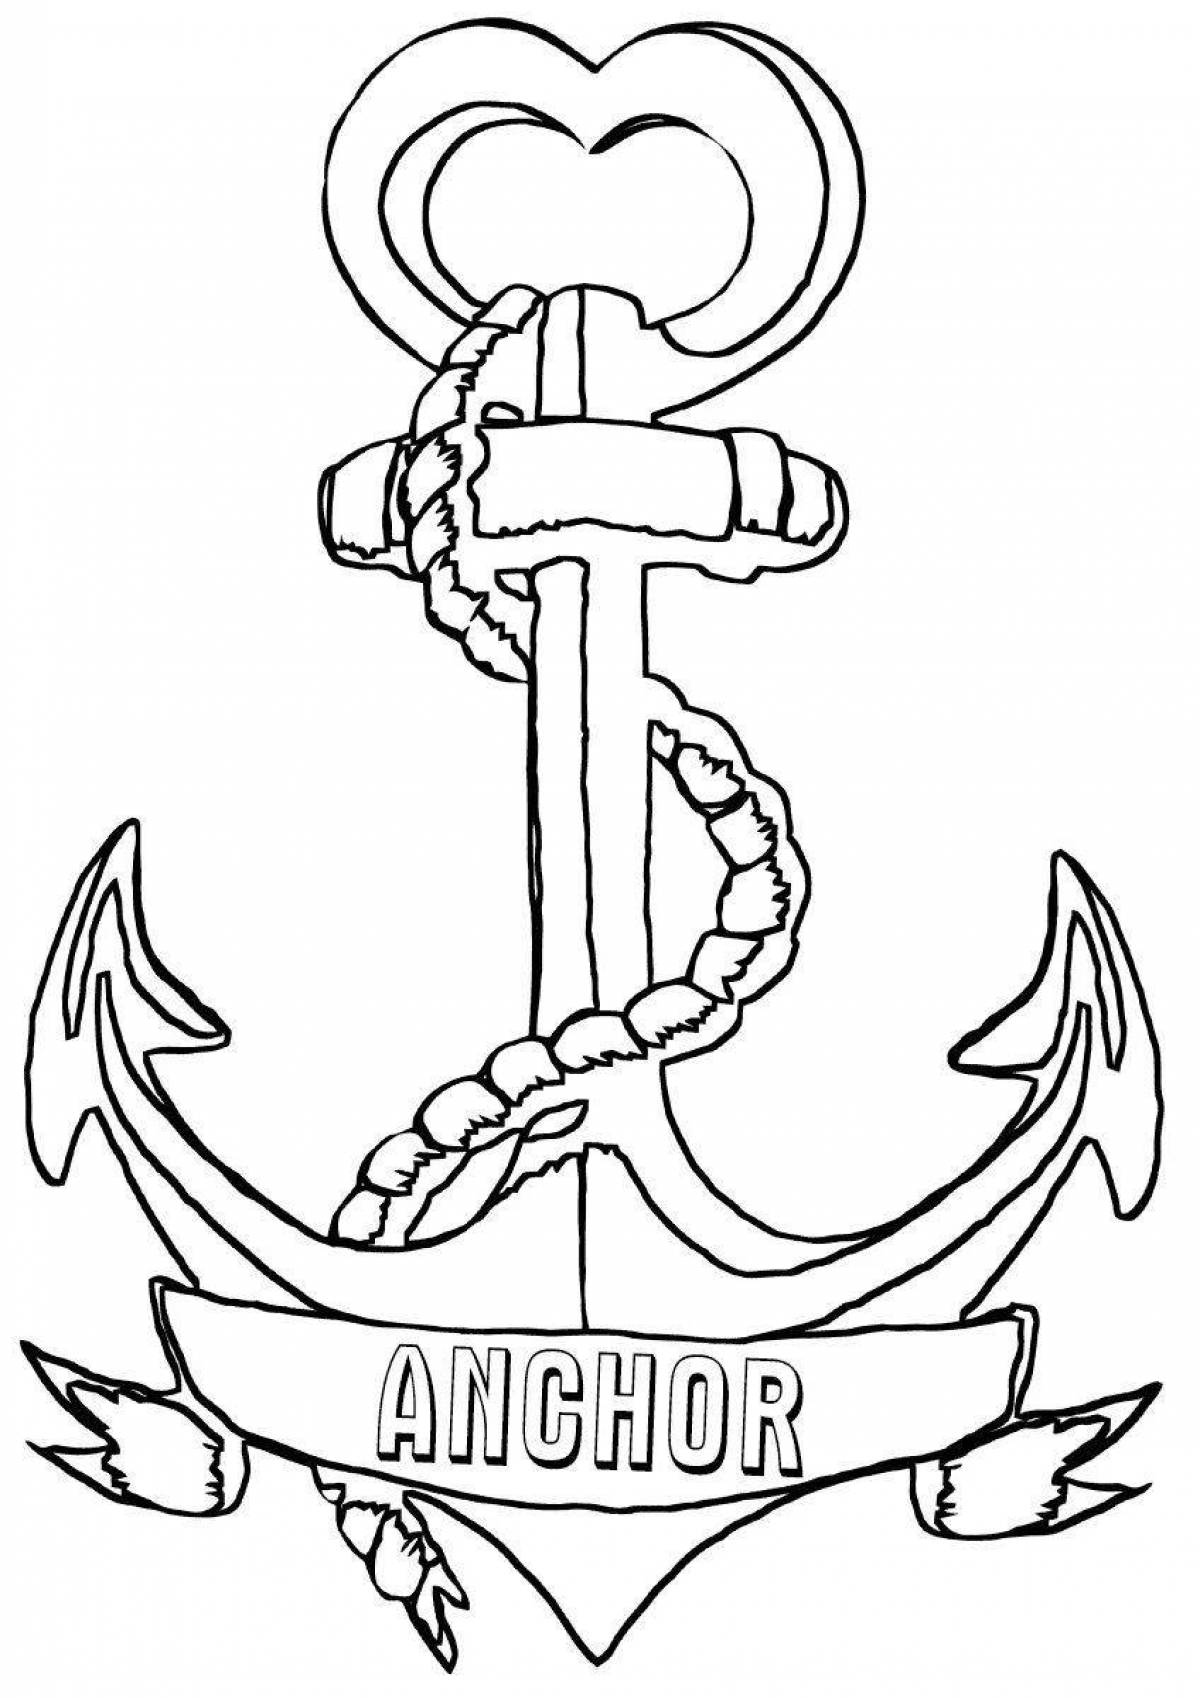 A playful anchor coloring page for kids